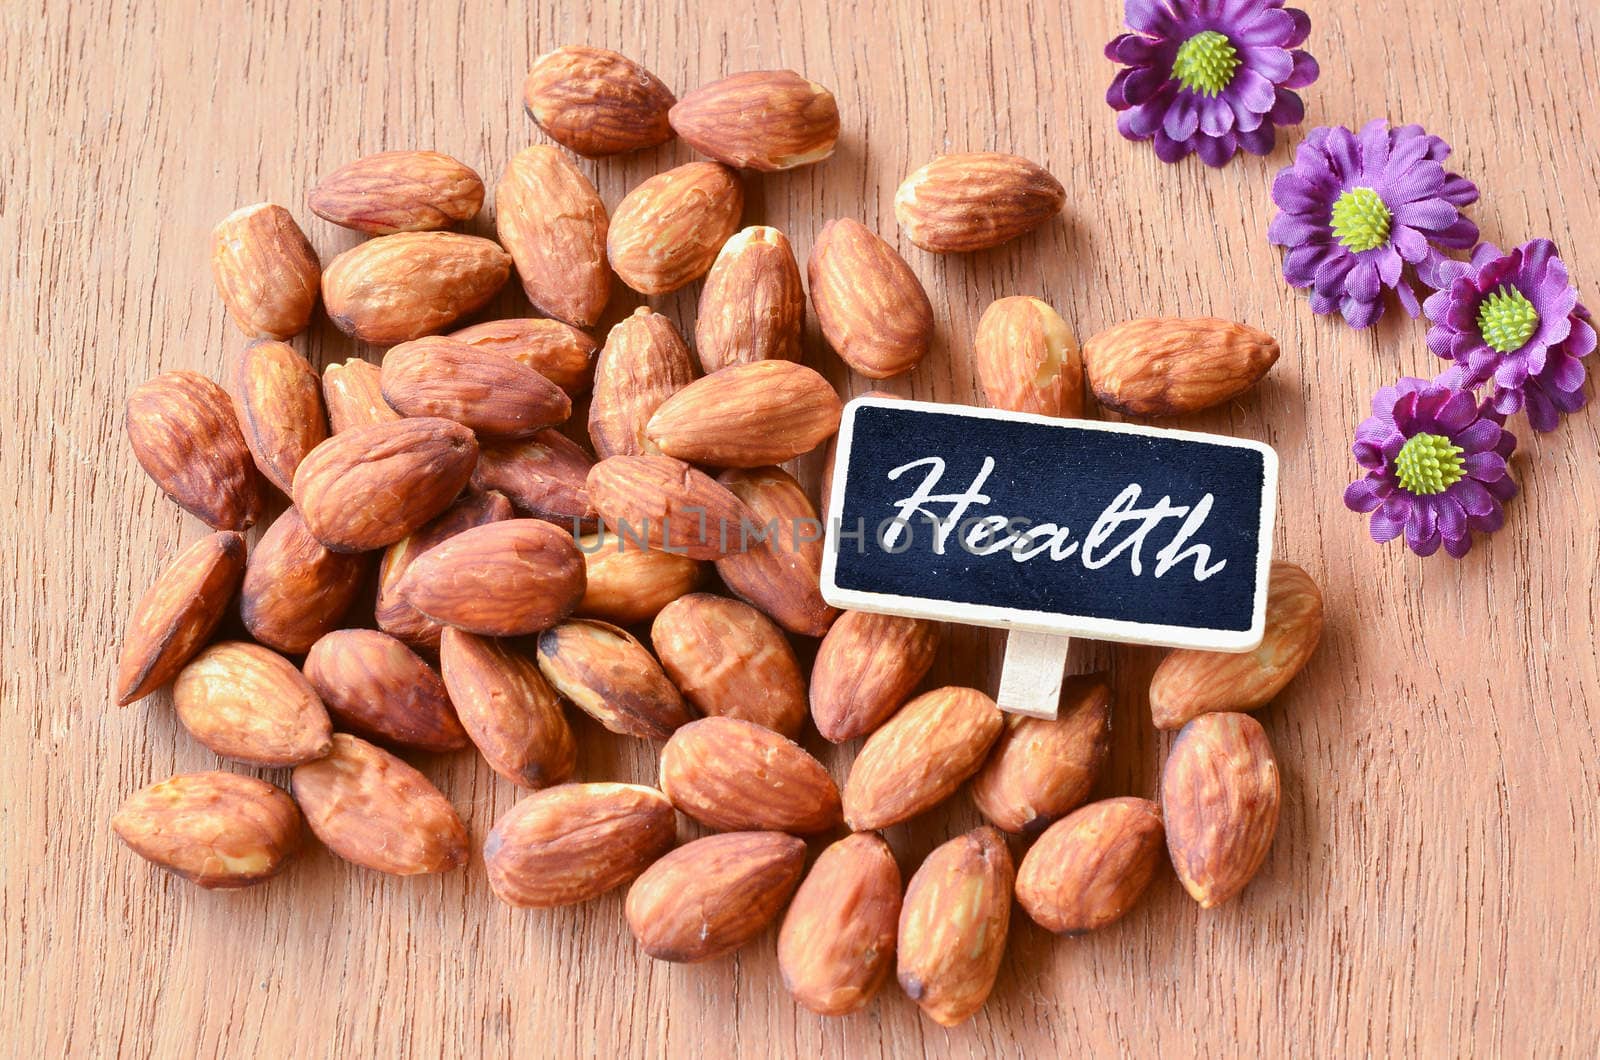 Almond and Health tag on wooden background. by Gamjai